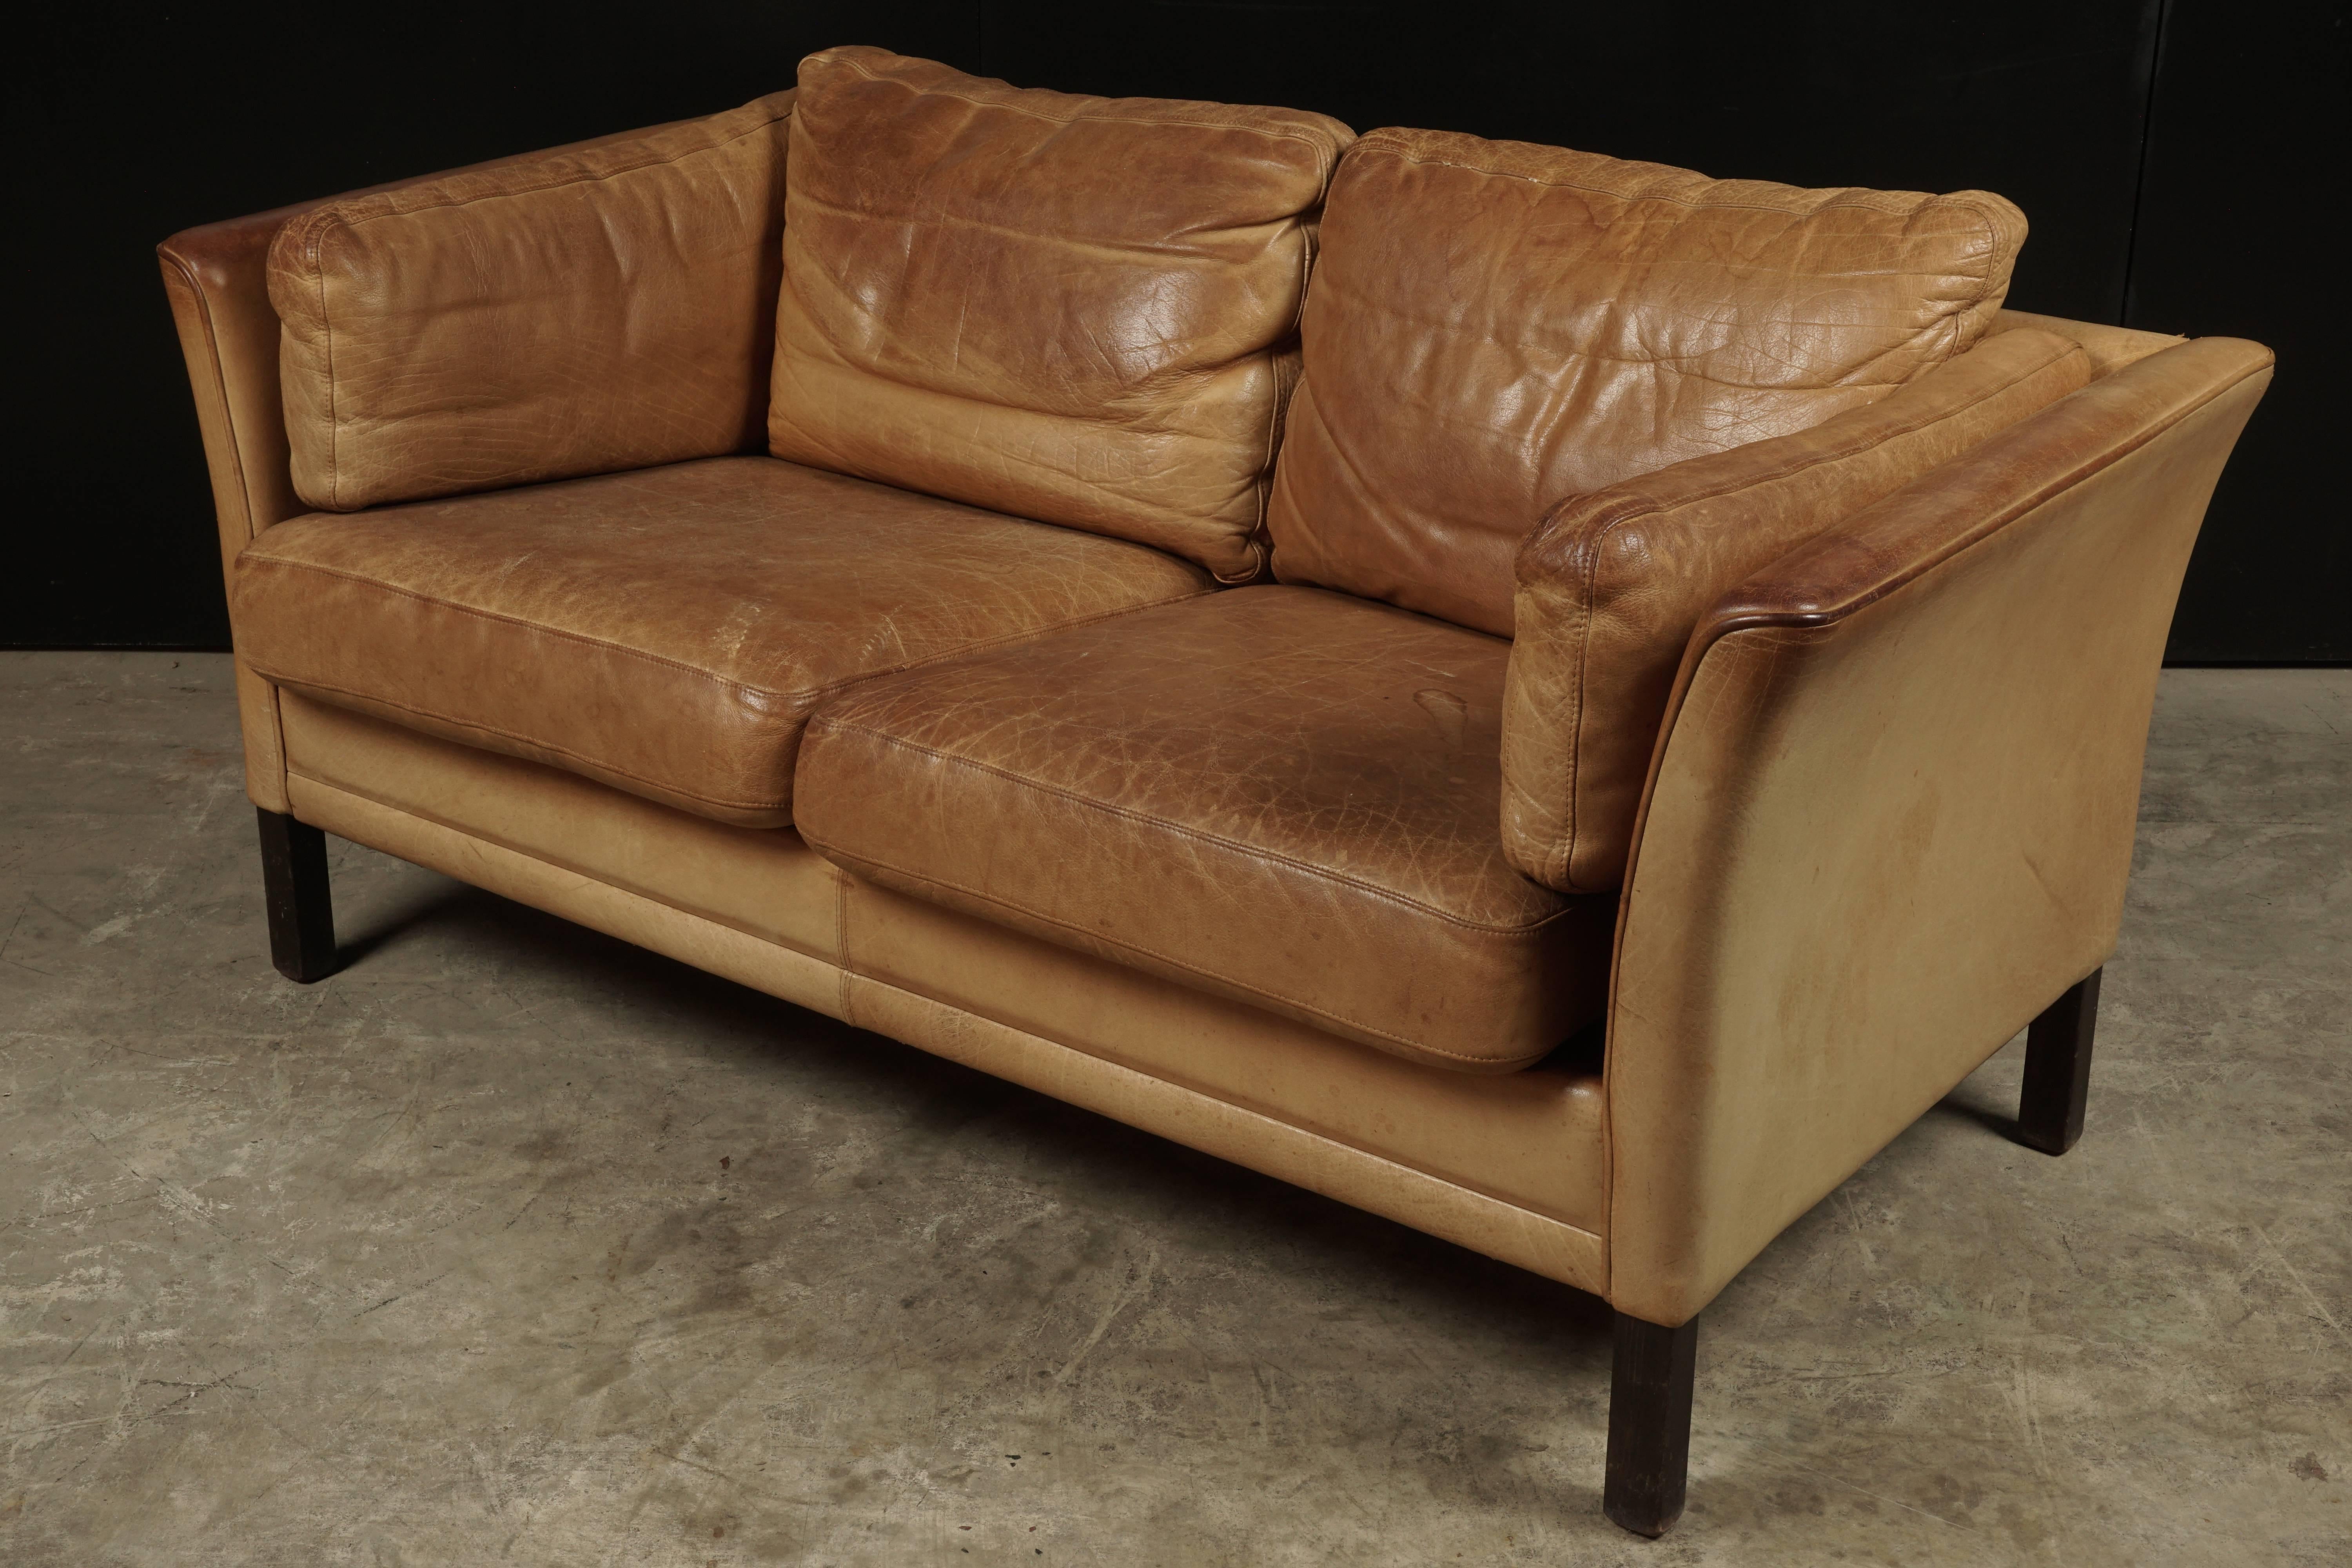 Midcentury two-seat sofa from Denmark, circa 1970. Original cognac leather upholstery with solid stained birch feet.